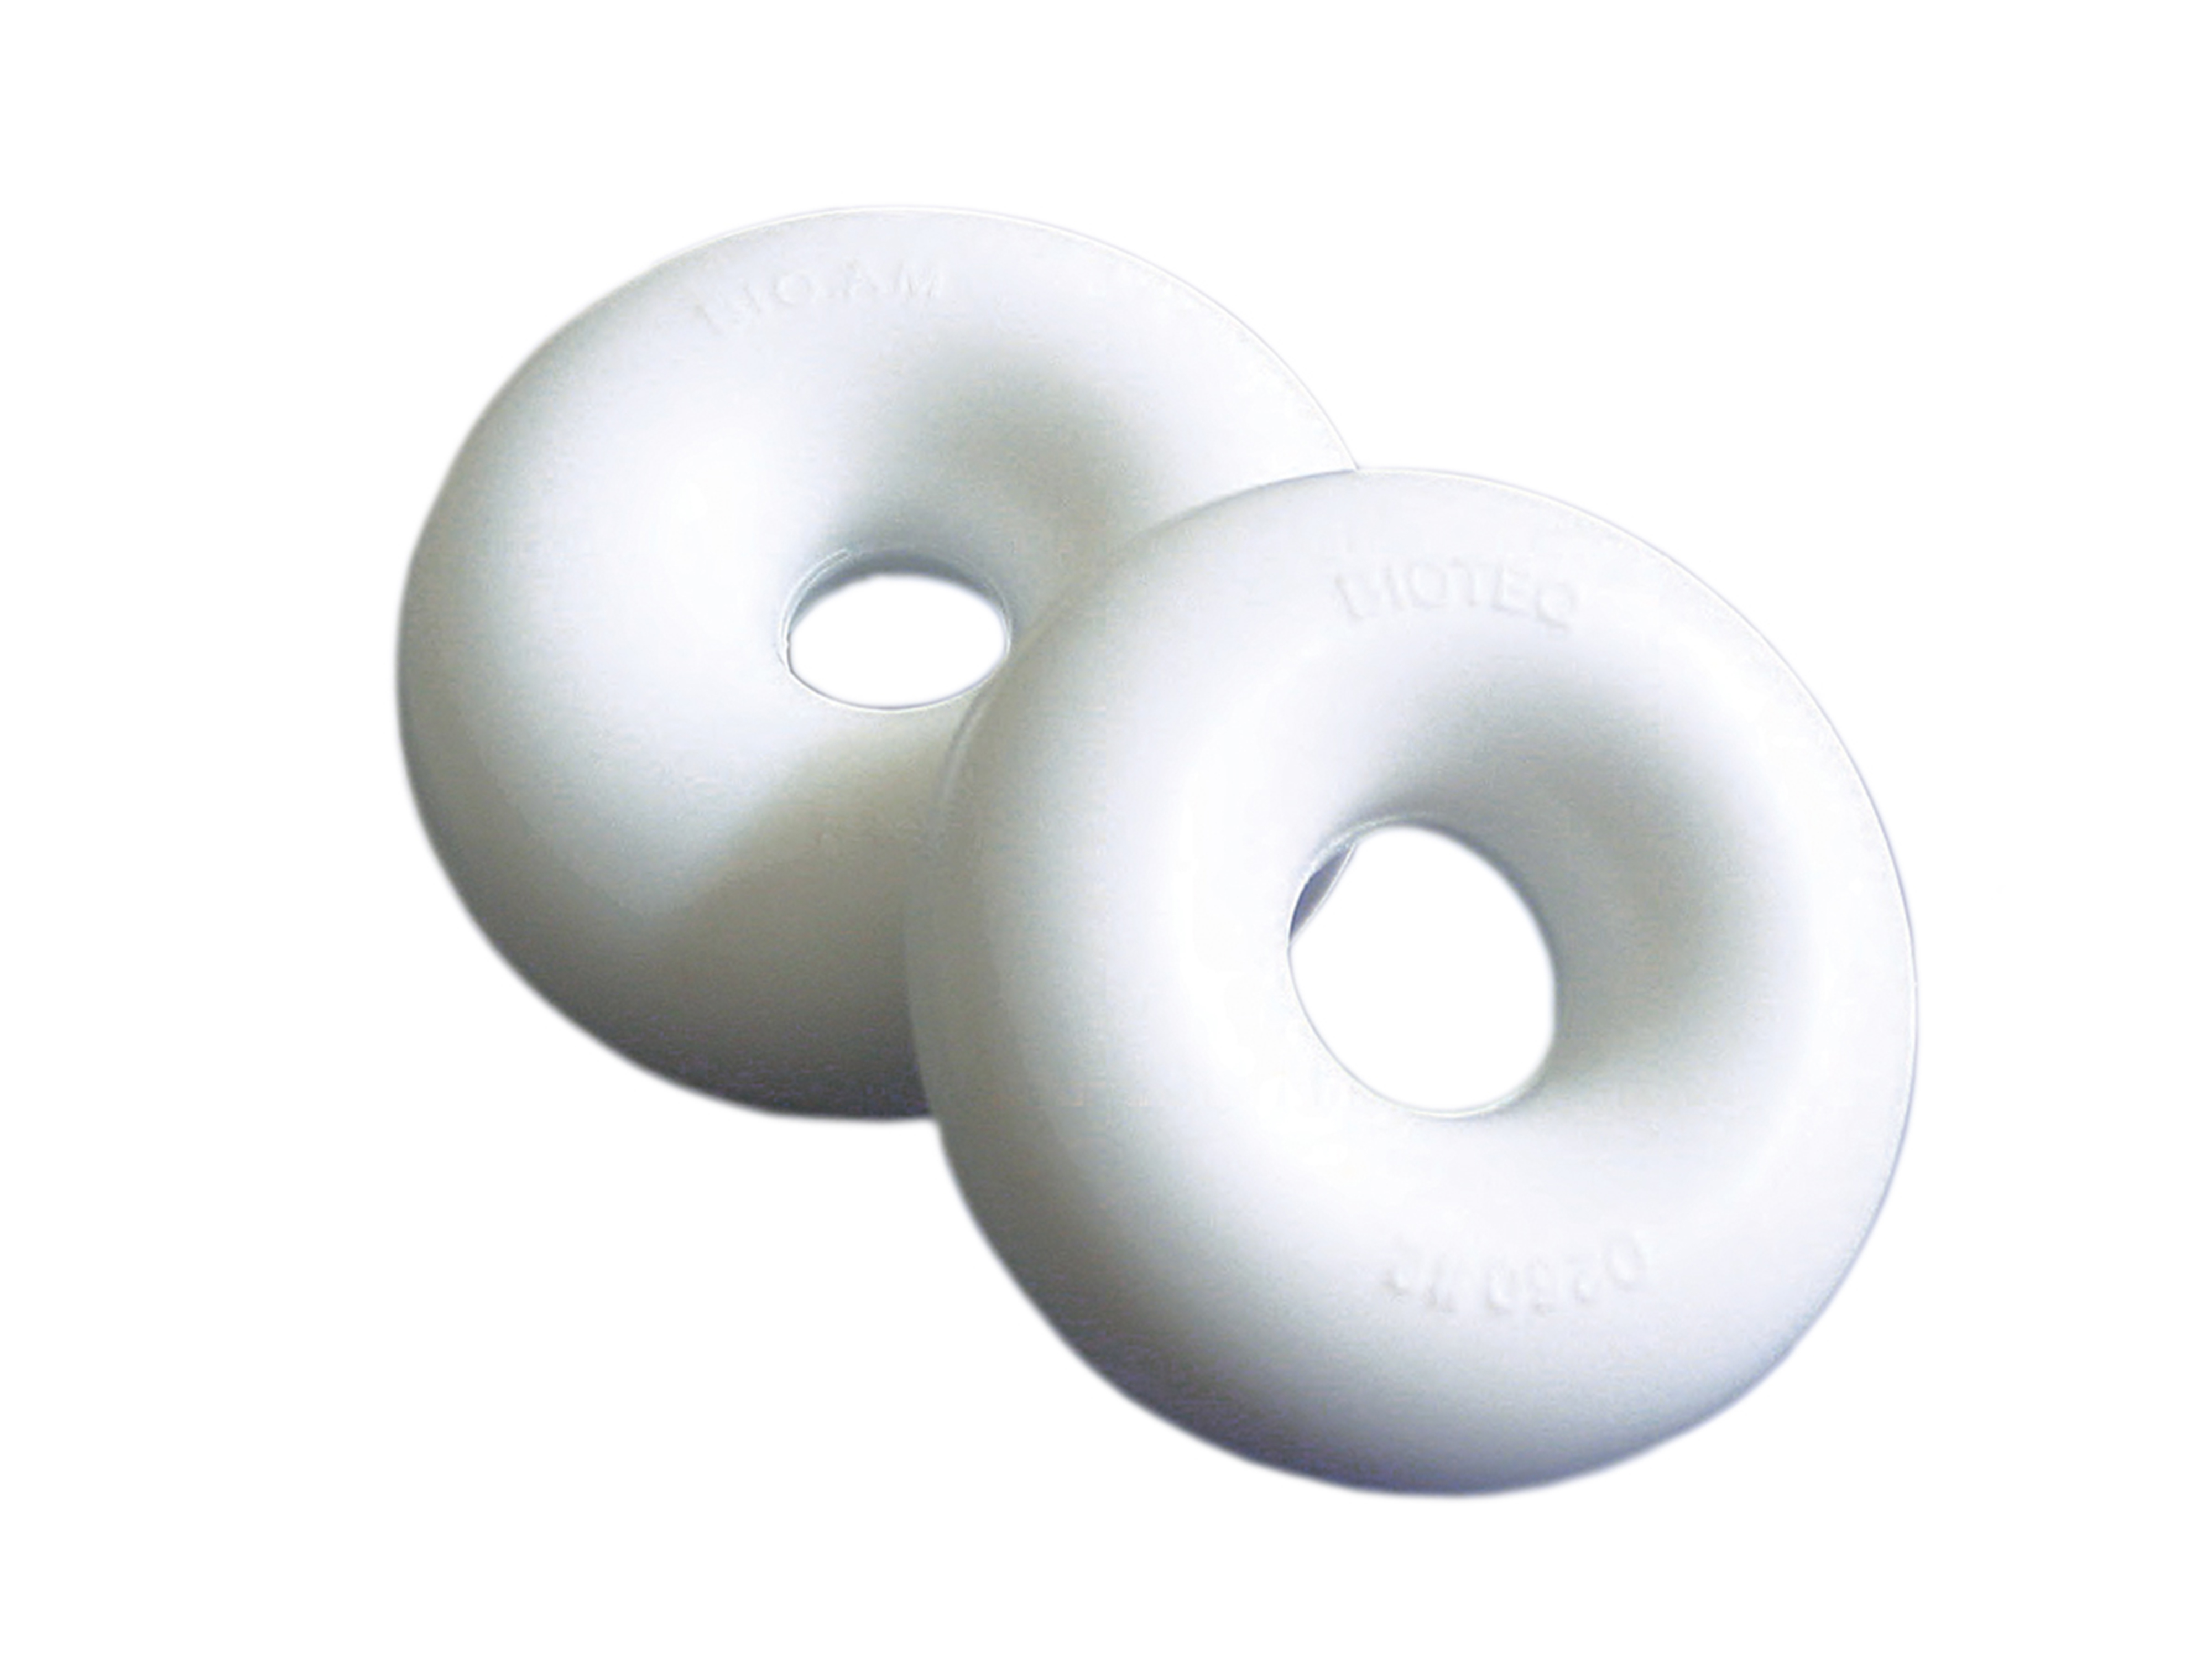 MedGyn Pessary Silicone Donut #1 2.2 inches or 57 mm